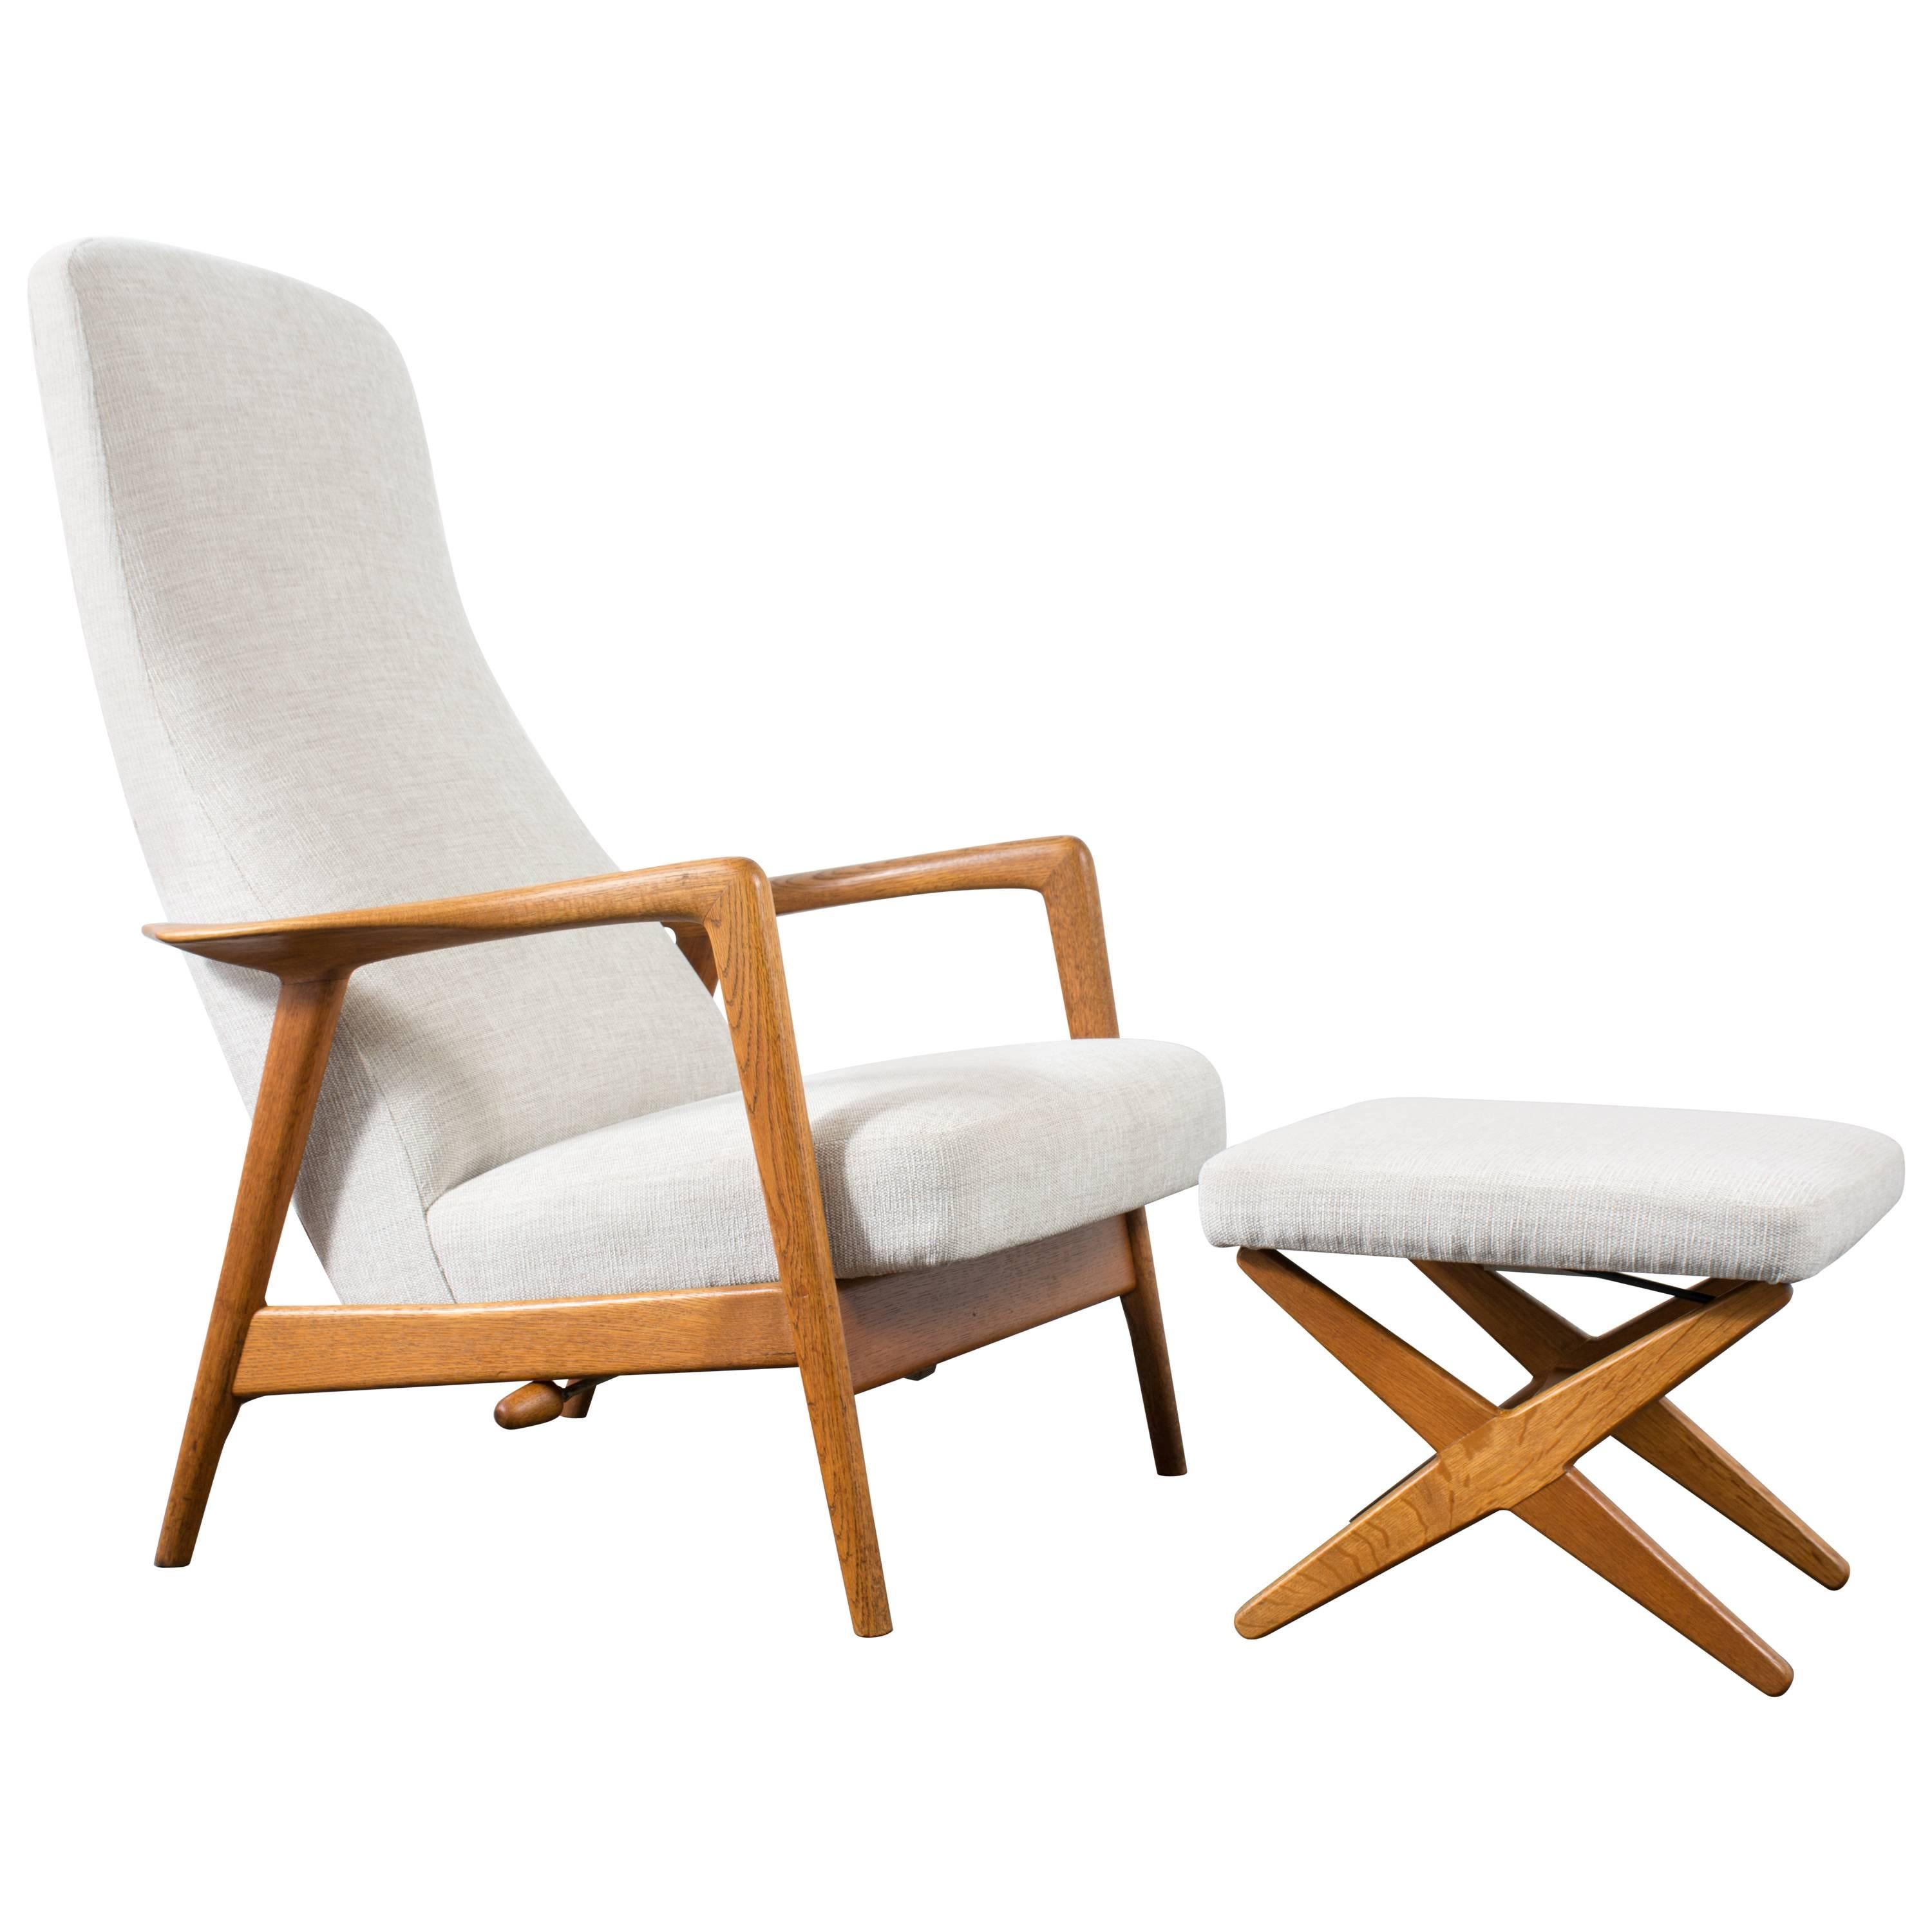 Vintage Mid-Century Lounge Chair and Ottoman by Folke Ohlsson